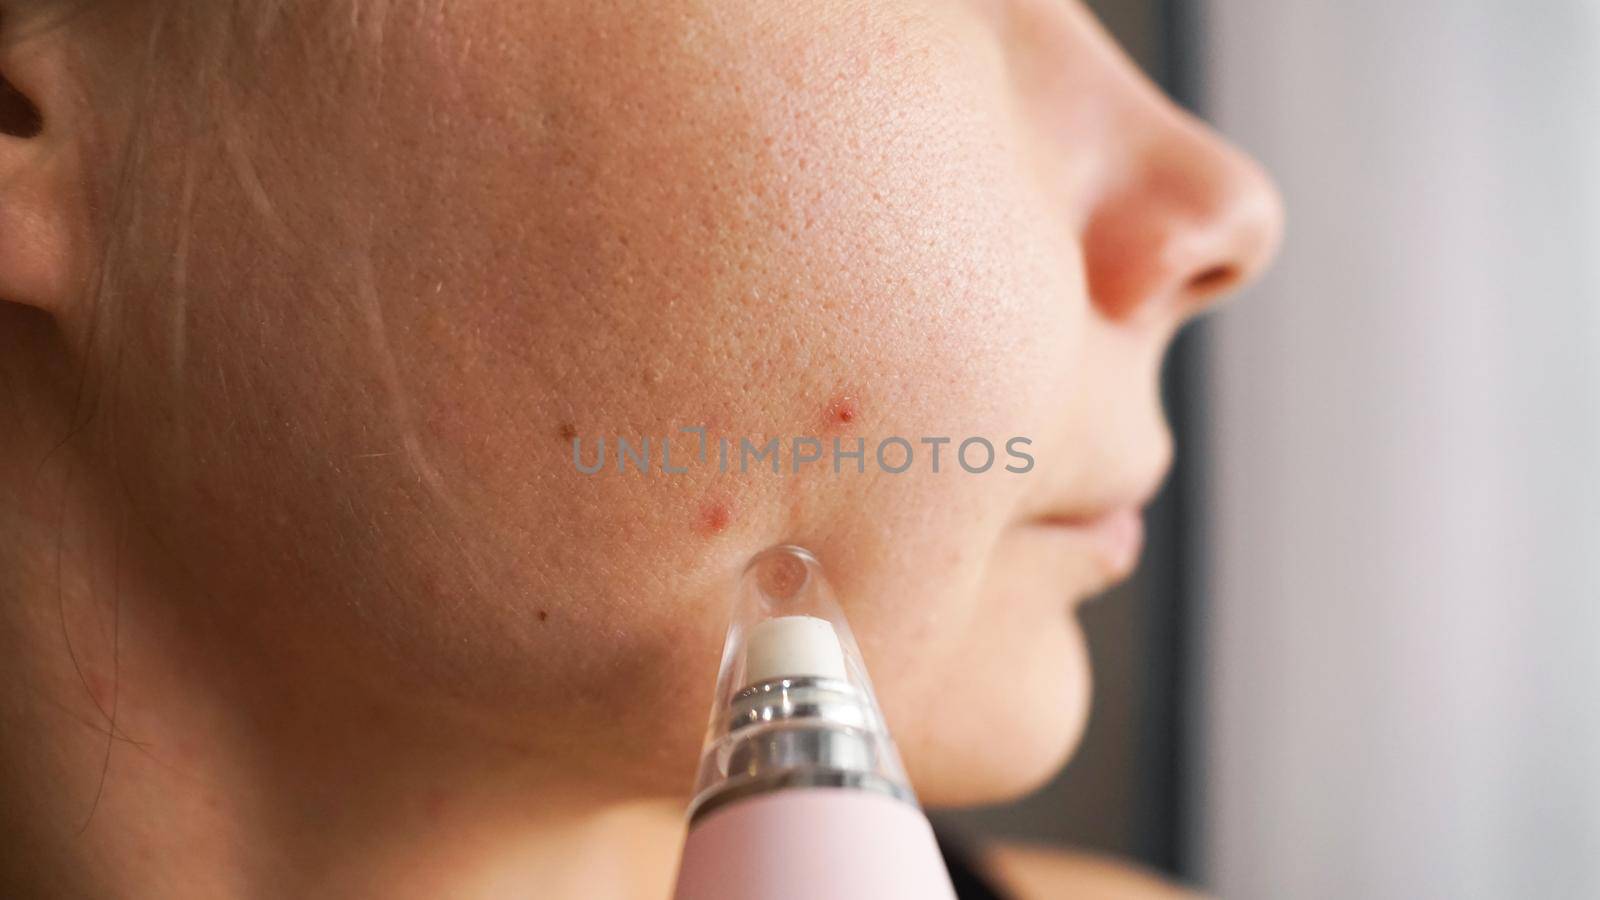 Vacuum device for removing blackheads and acne from the face by natali_brill